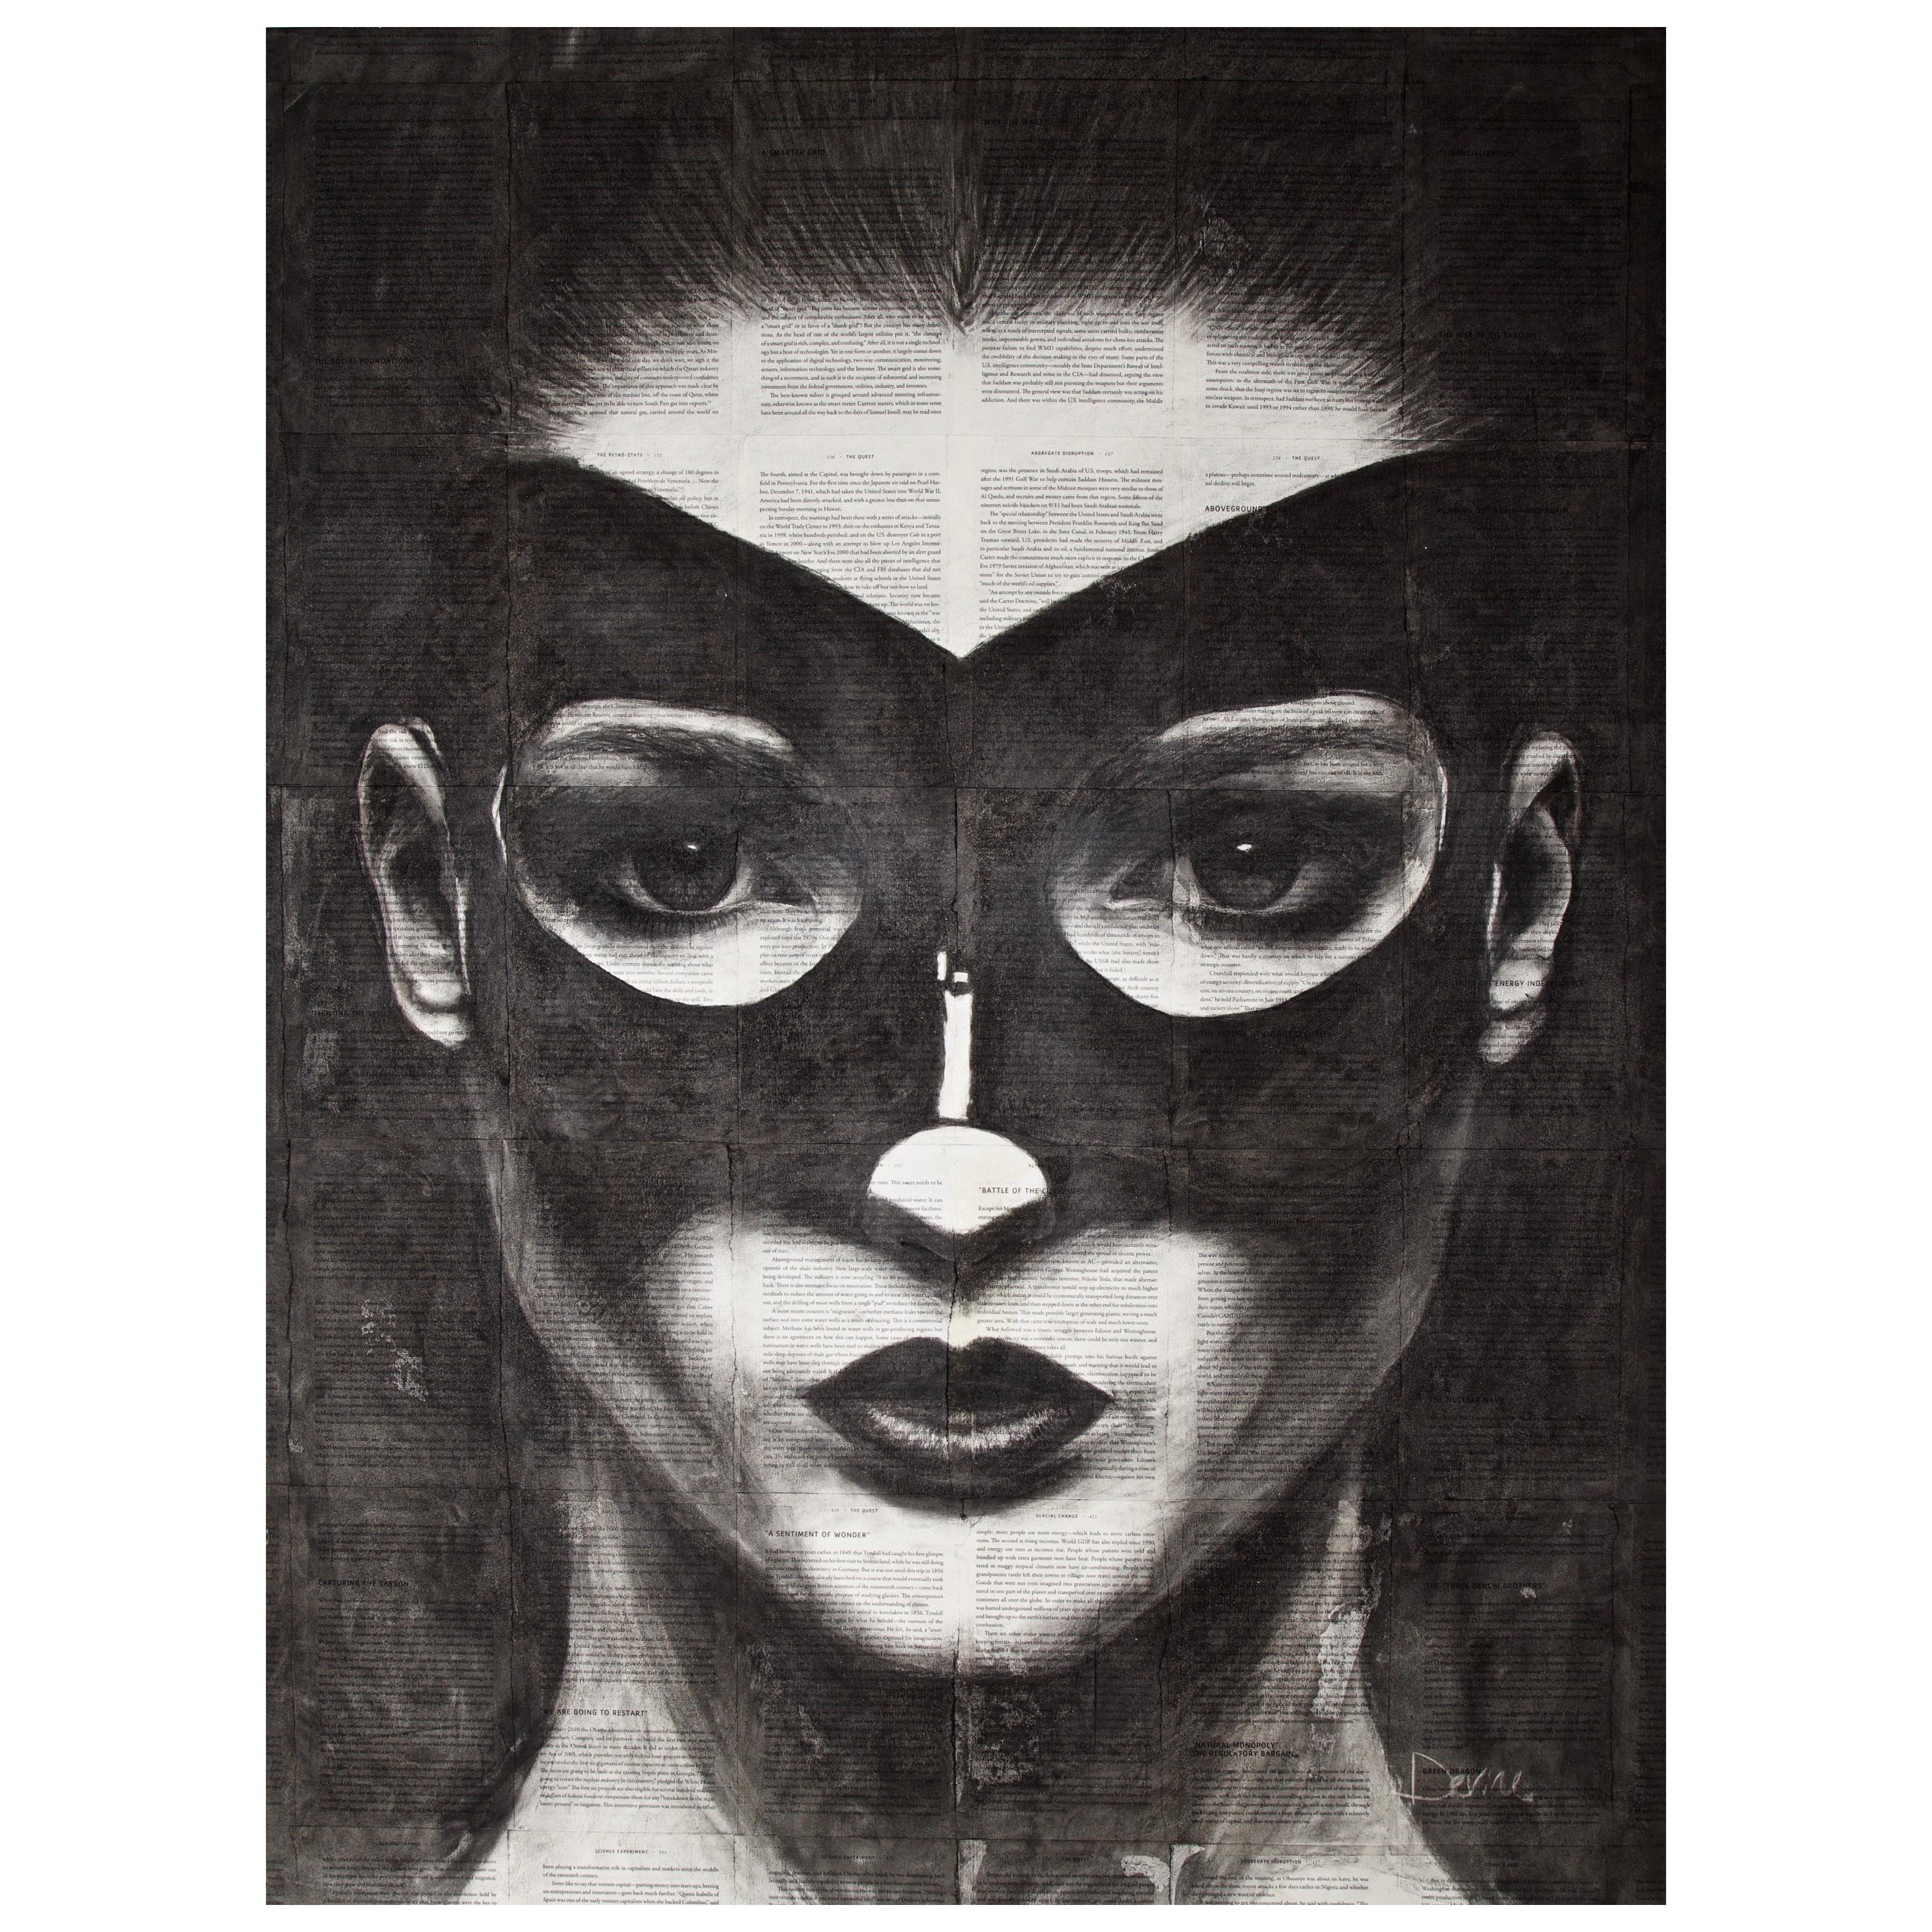 Original Charcoal and Acrylic Media by Kelly Devine, Titled Indispensable Power